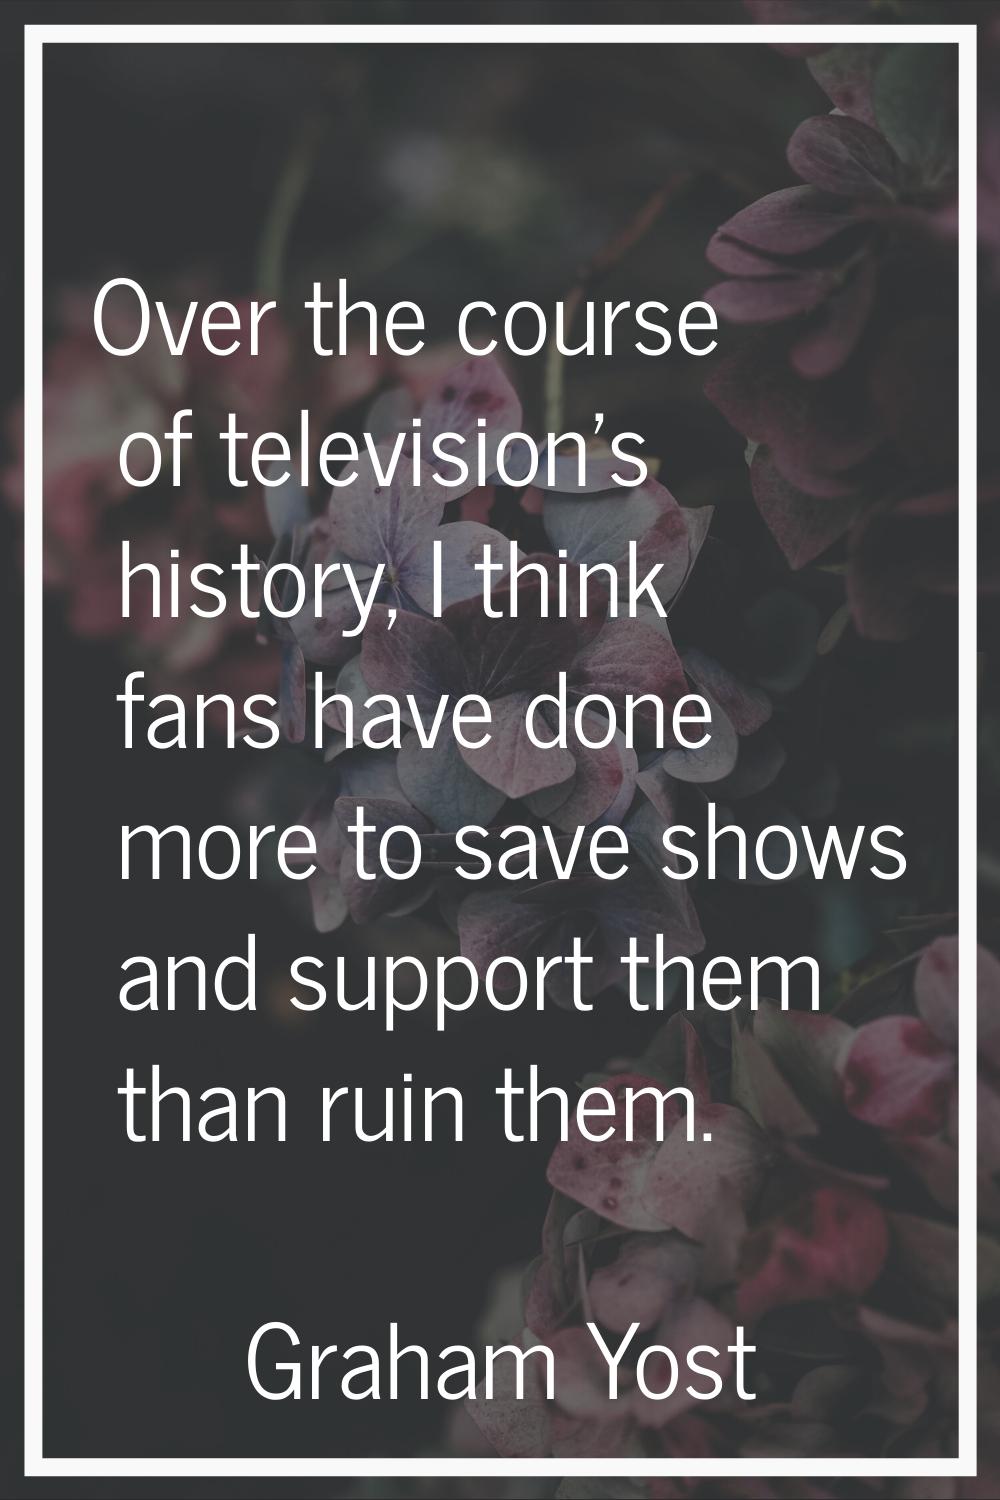 Over the course of television's history, I think fans have done more to save shows and support them